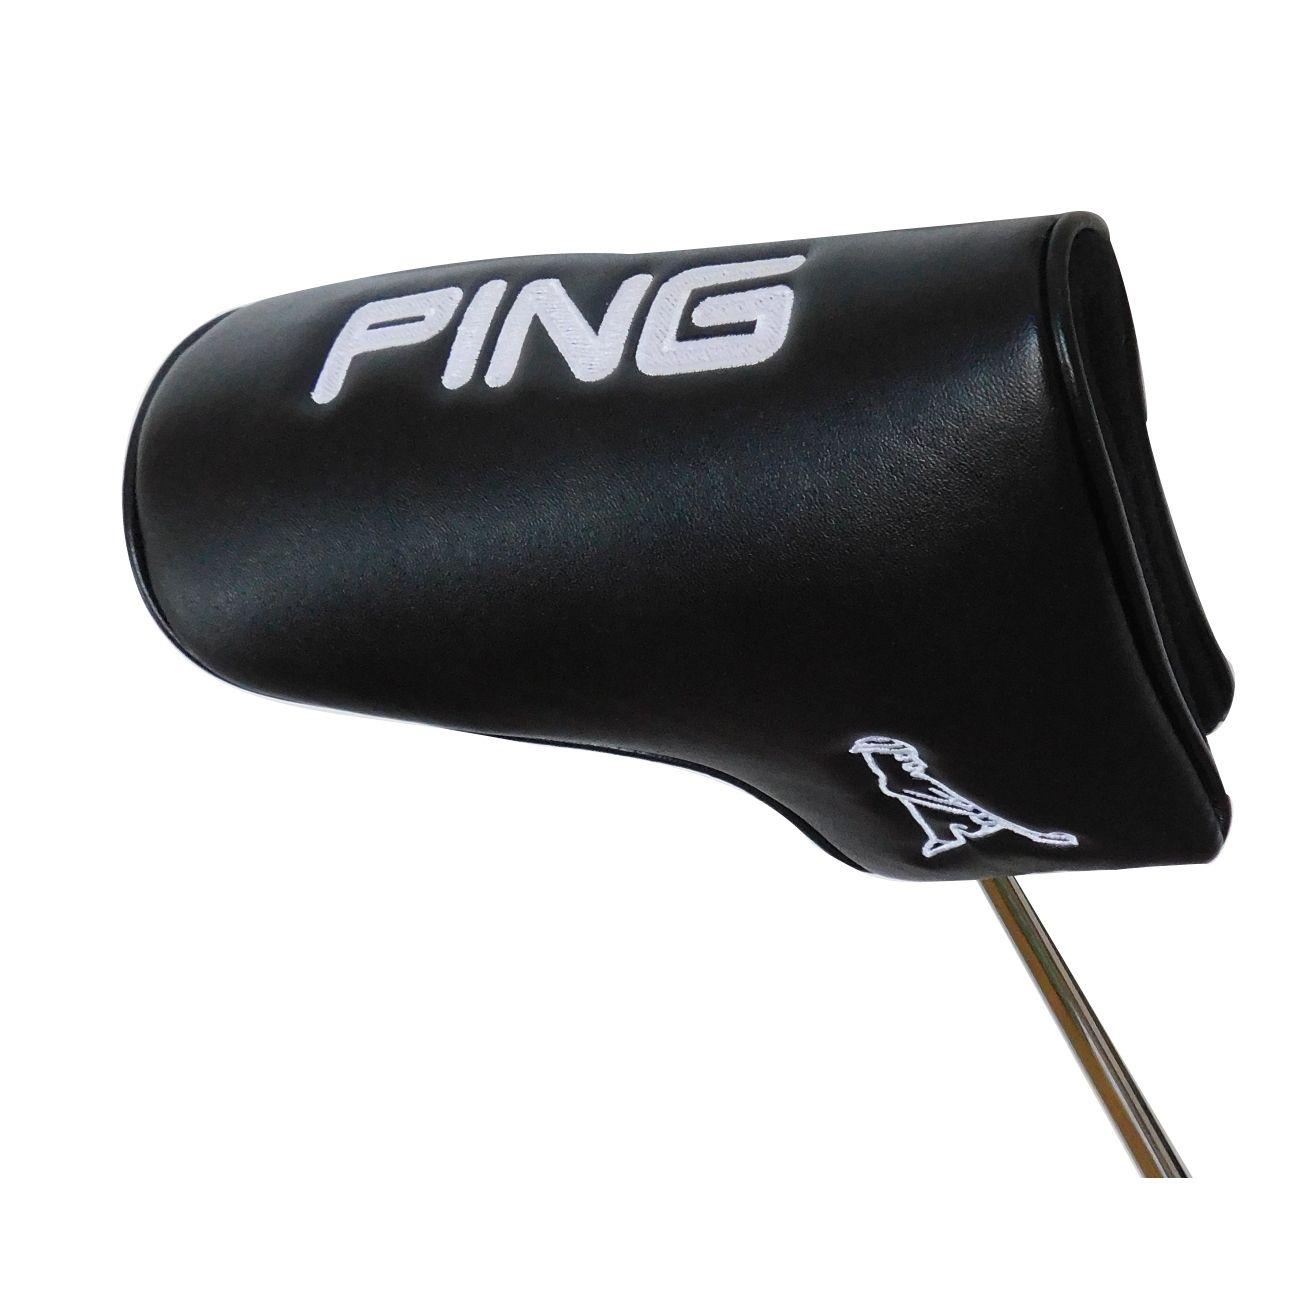 Mr. Ping Logo - PING Putter Head Cover'Dwyers Golf Store